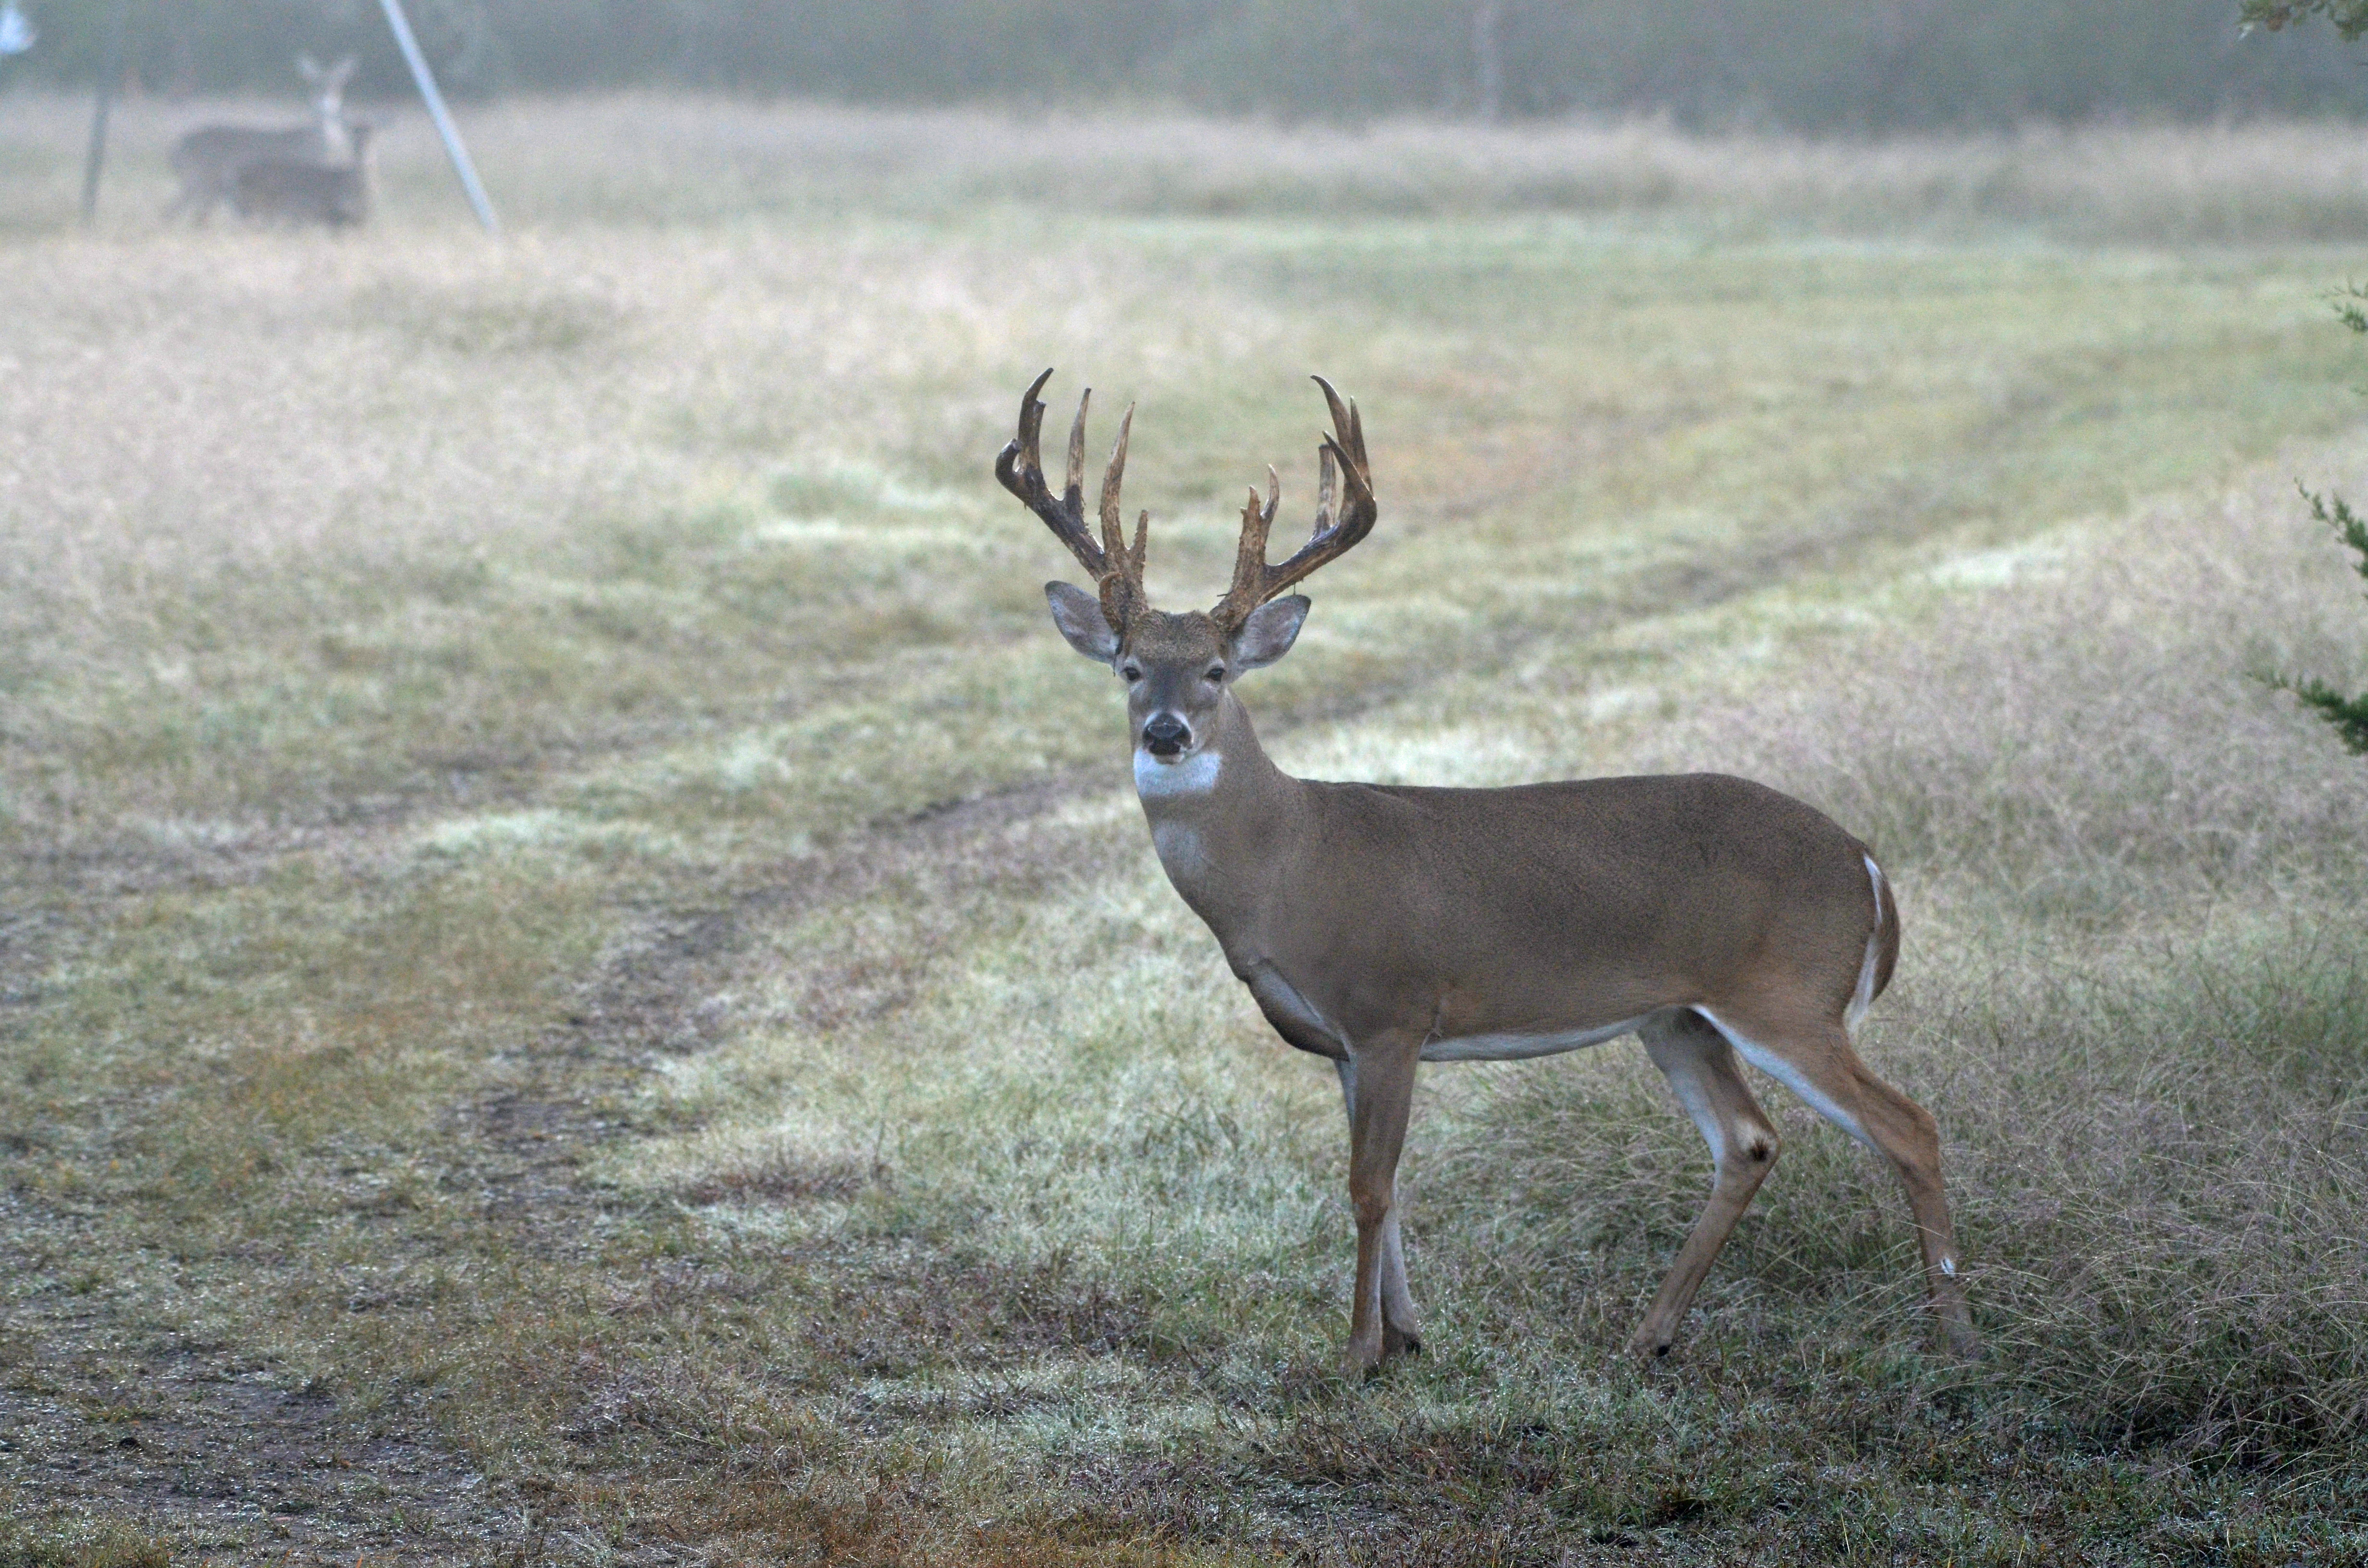 Big Whitetail Buck with does looking on at Texas Hunting Ranch